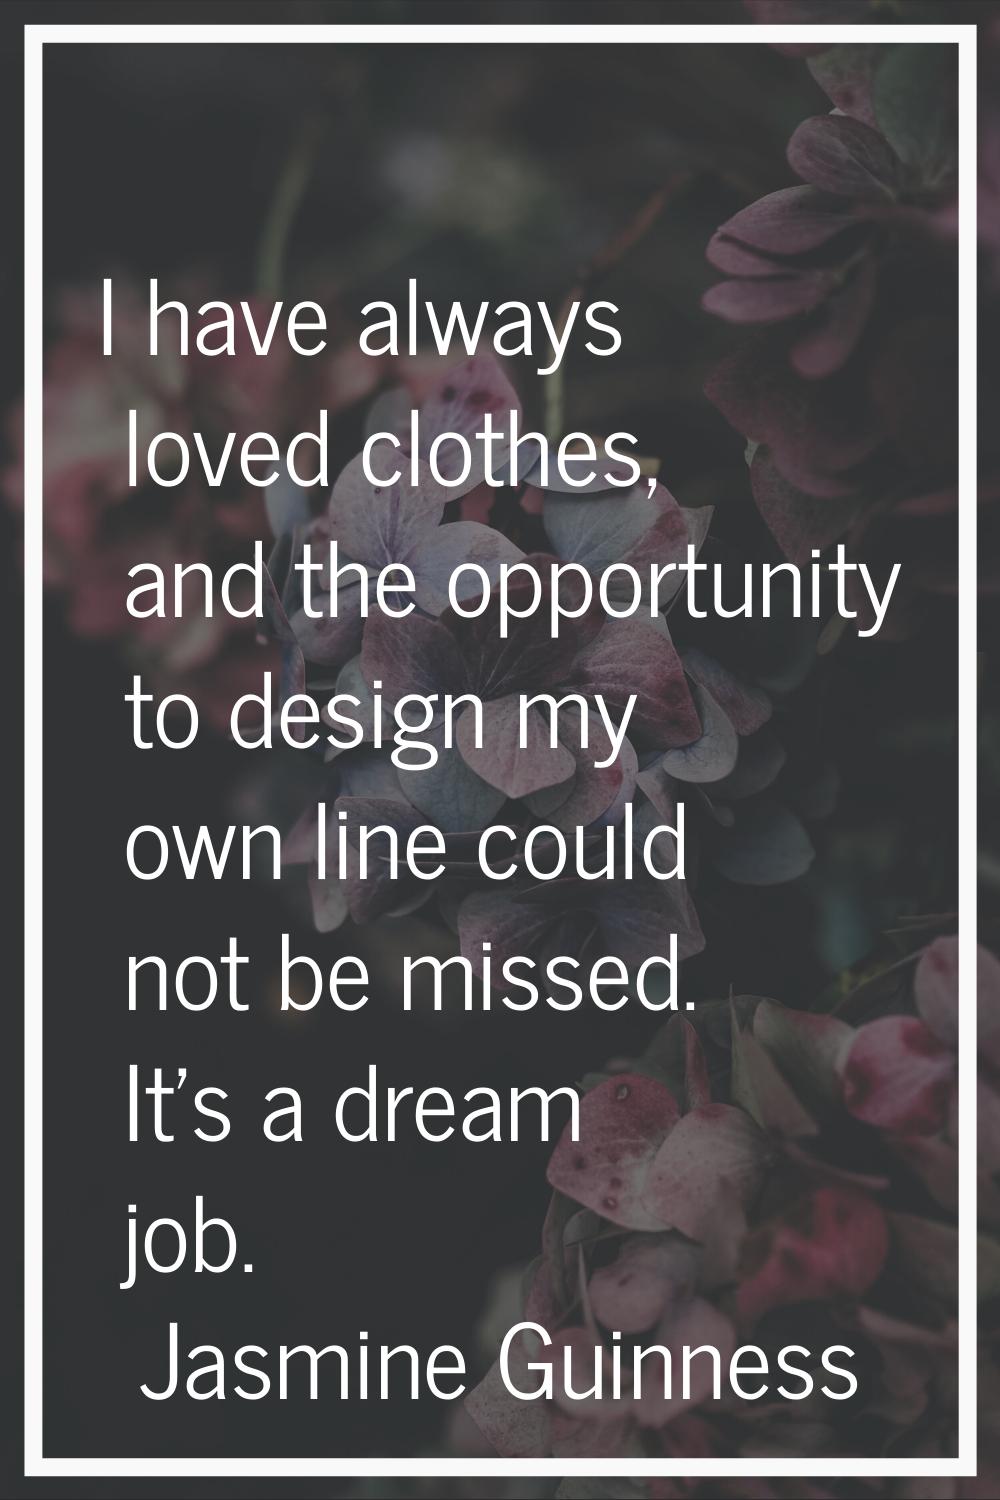 I have always loved clothes, and the opportunity to design my own line could not be missed. It's a 